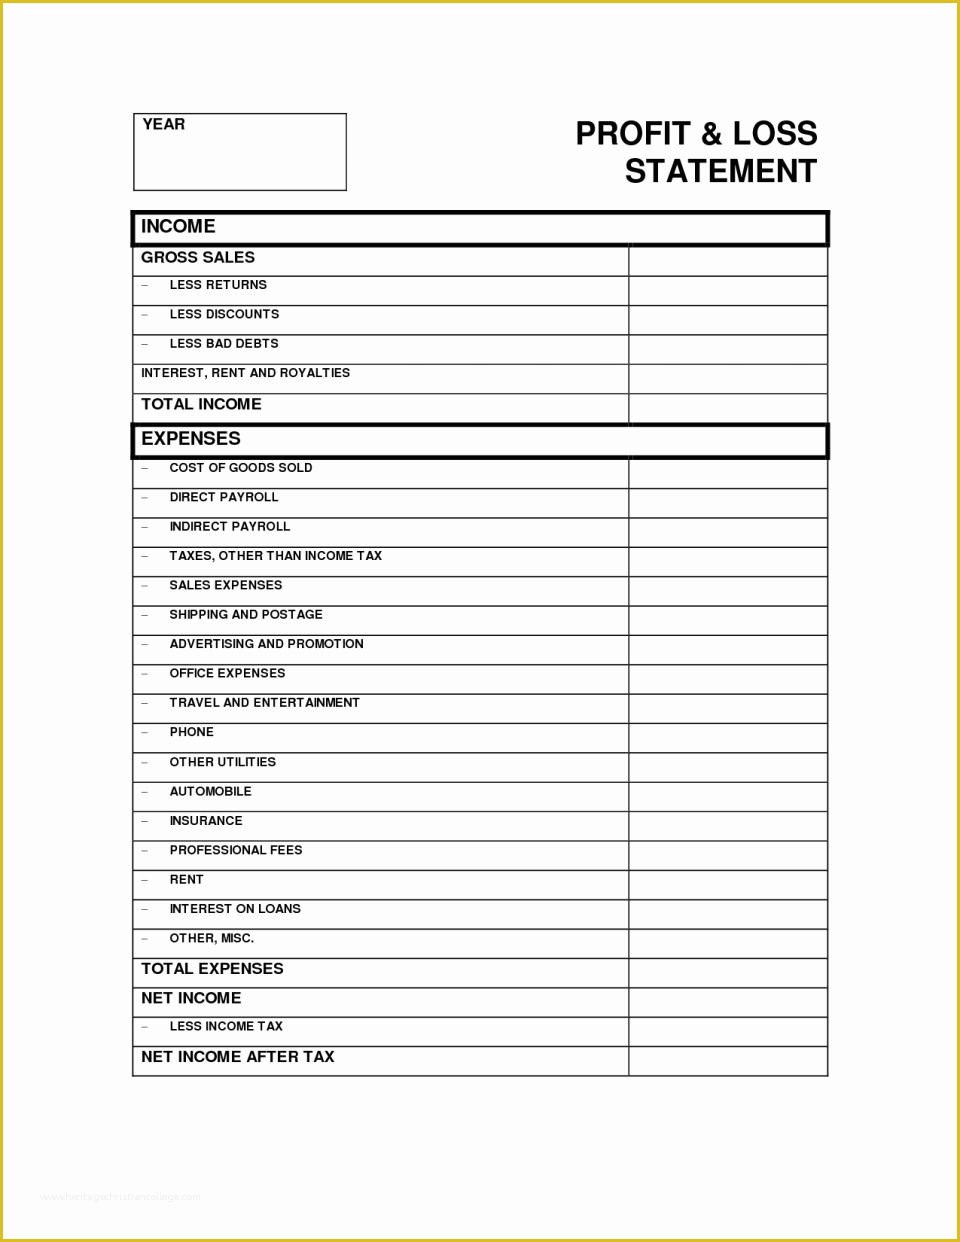 Profit and Loss Statement Template Free Of Simple Profit Loss Spreadsheet Sheet and Template for Self